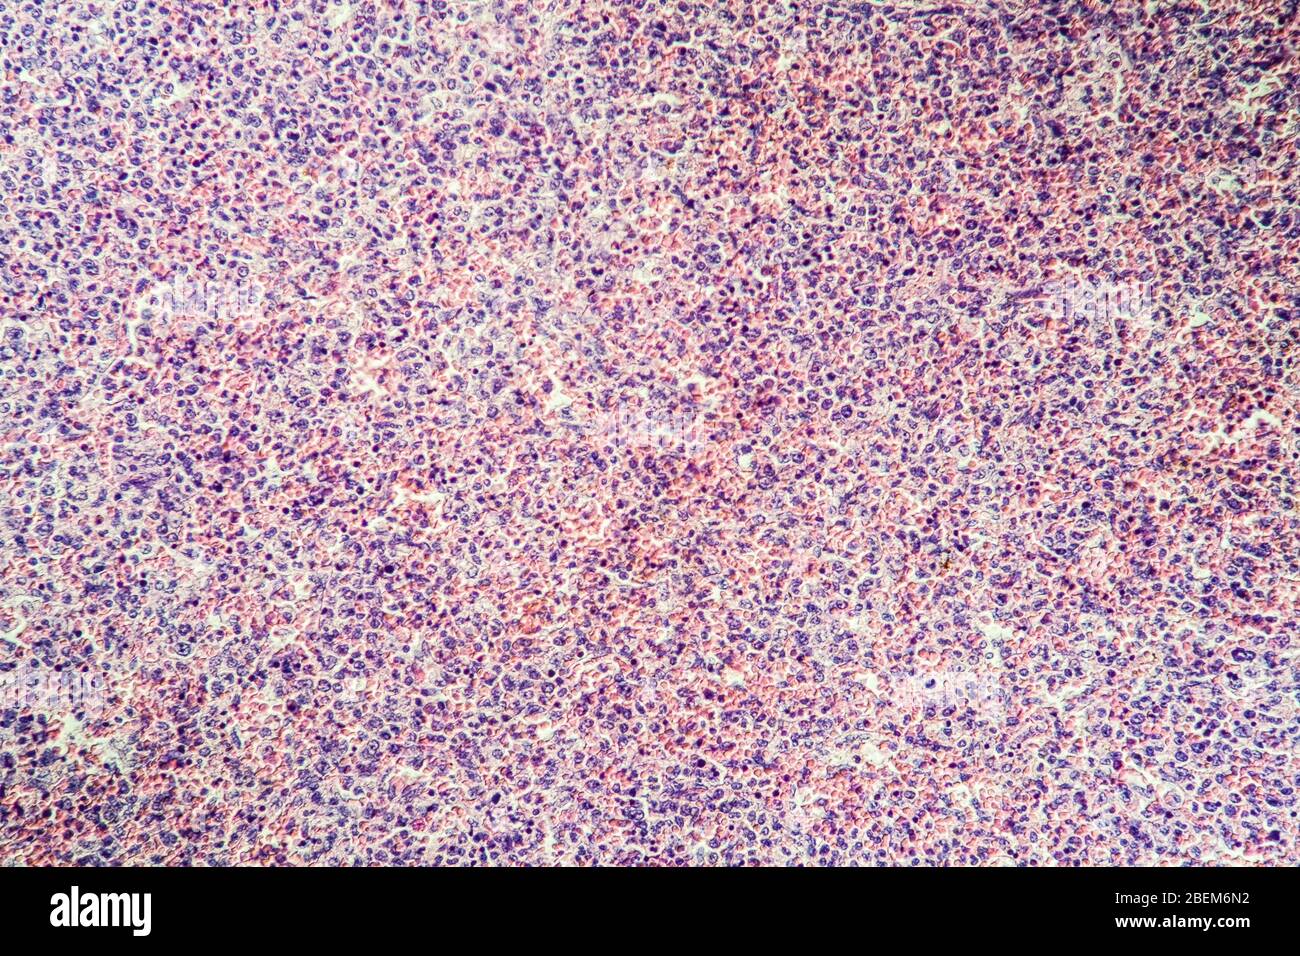 Gas burn of the liver diseased tissue under the microscope 100x Stock Photo